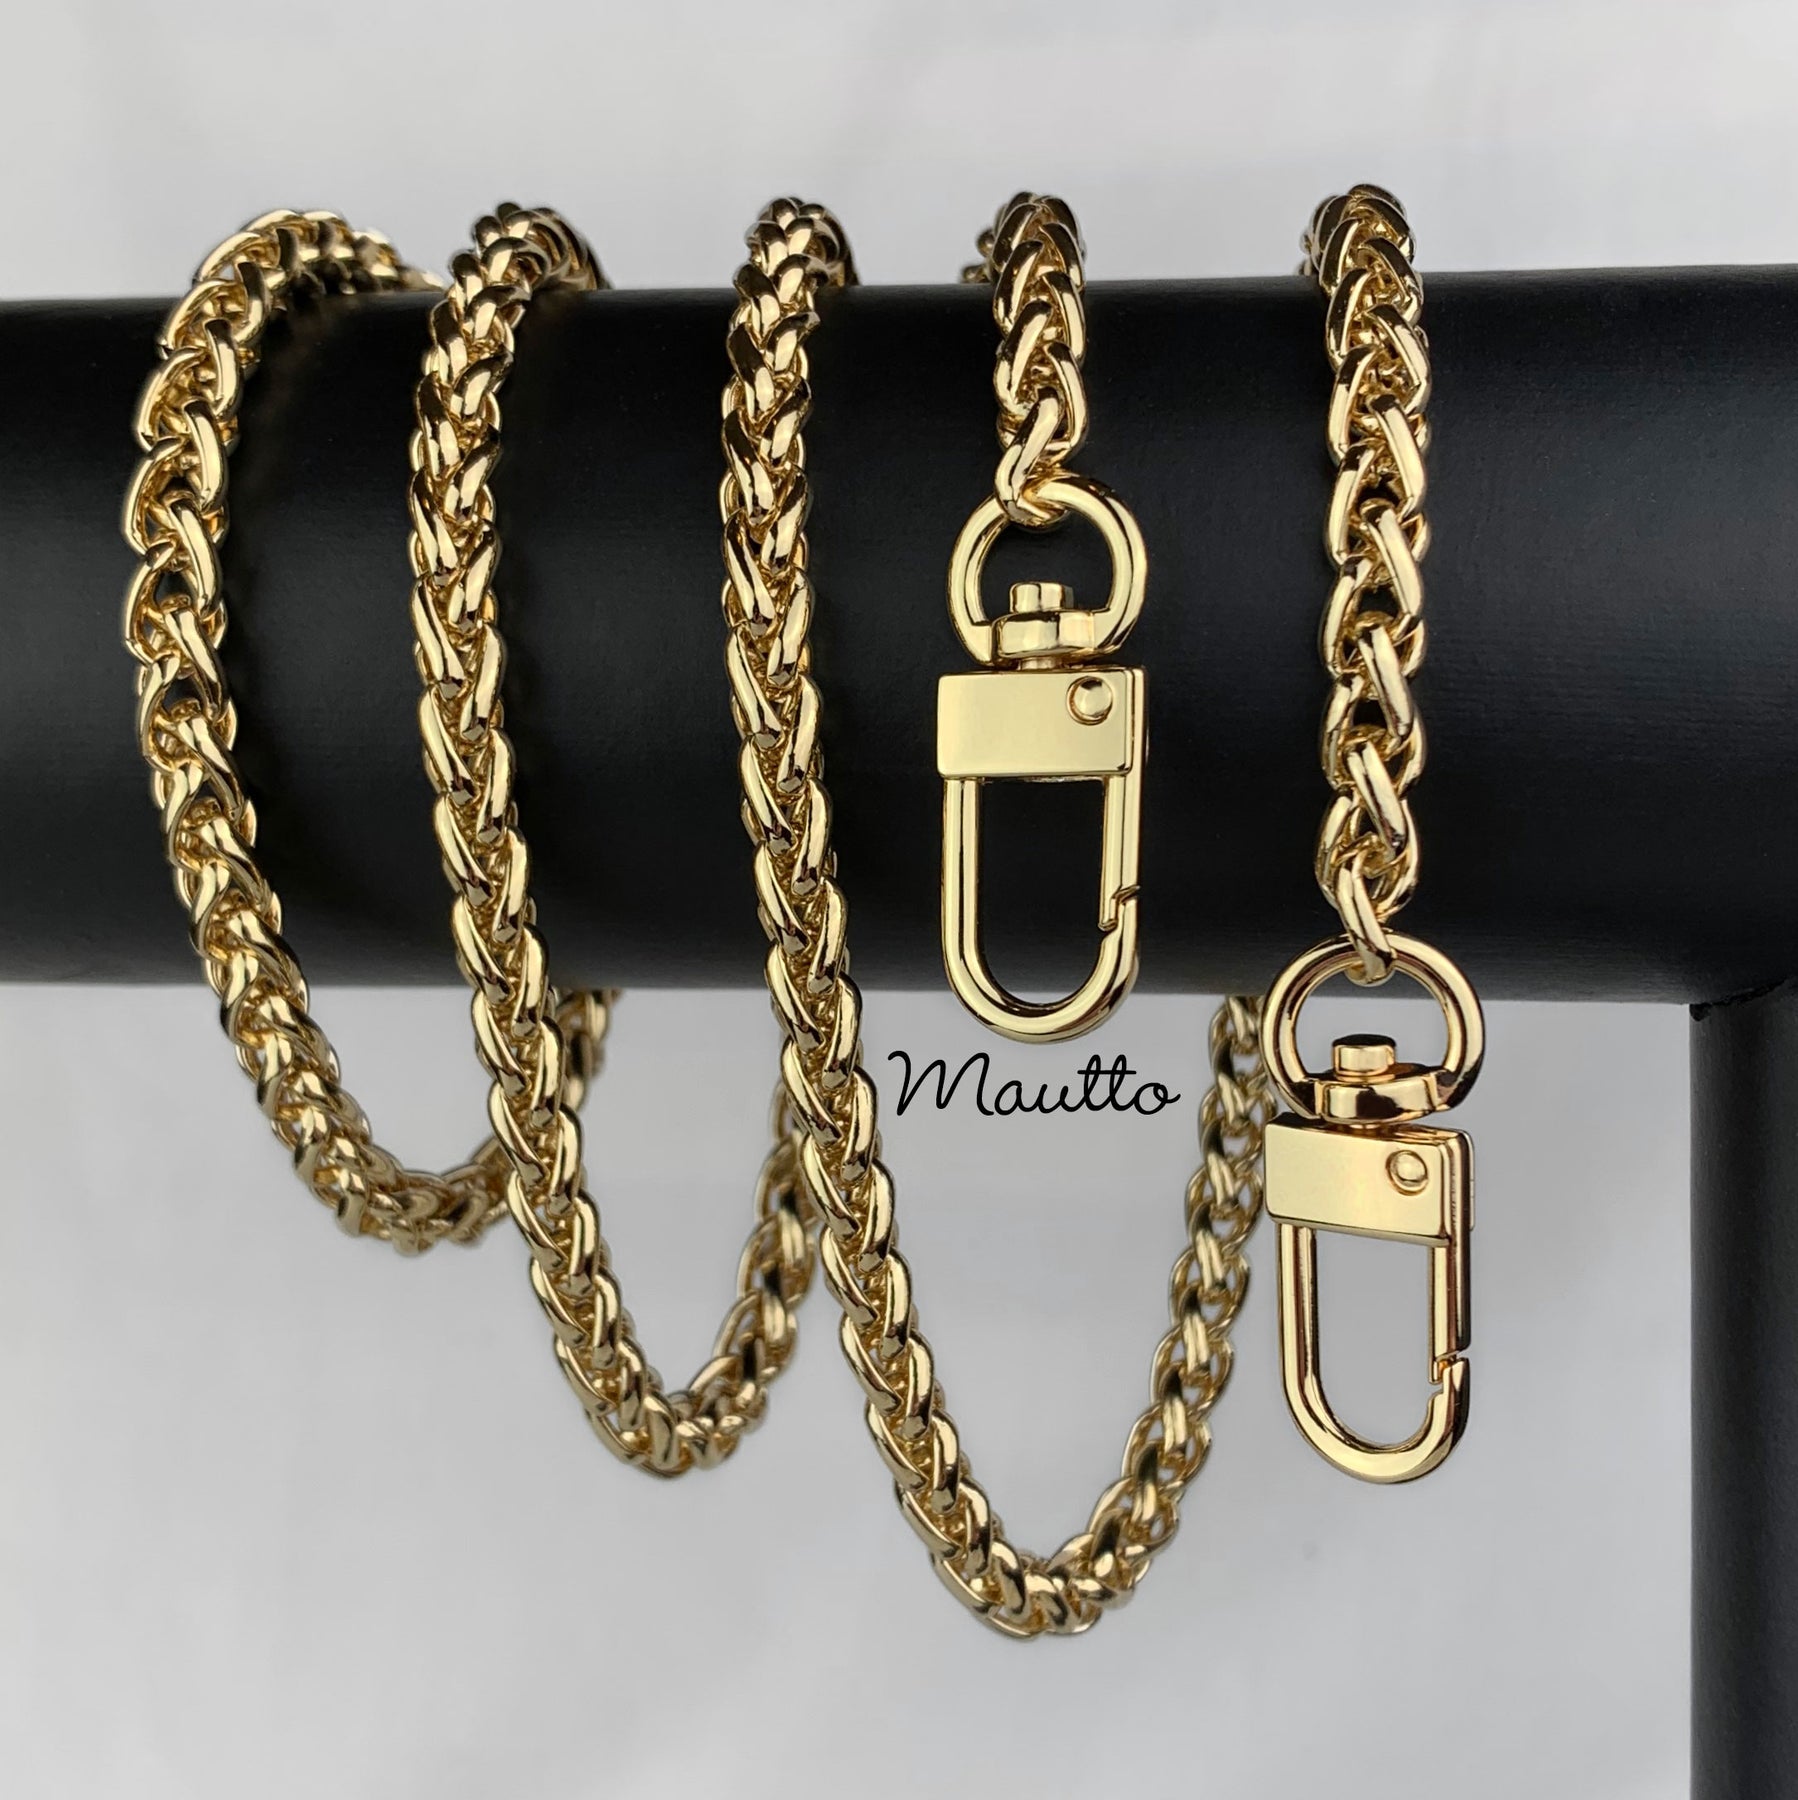 Mautto Wallet Chain / Key Tether - Standard & Long Lengths, Removable Keyring Long - 27 Inches / Gold-Tone